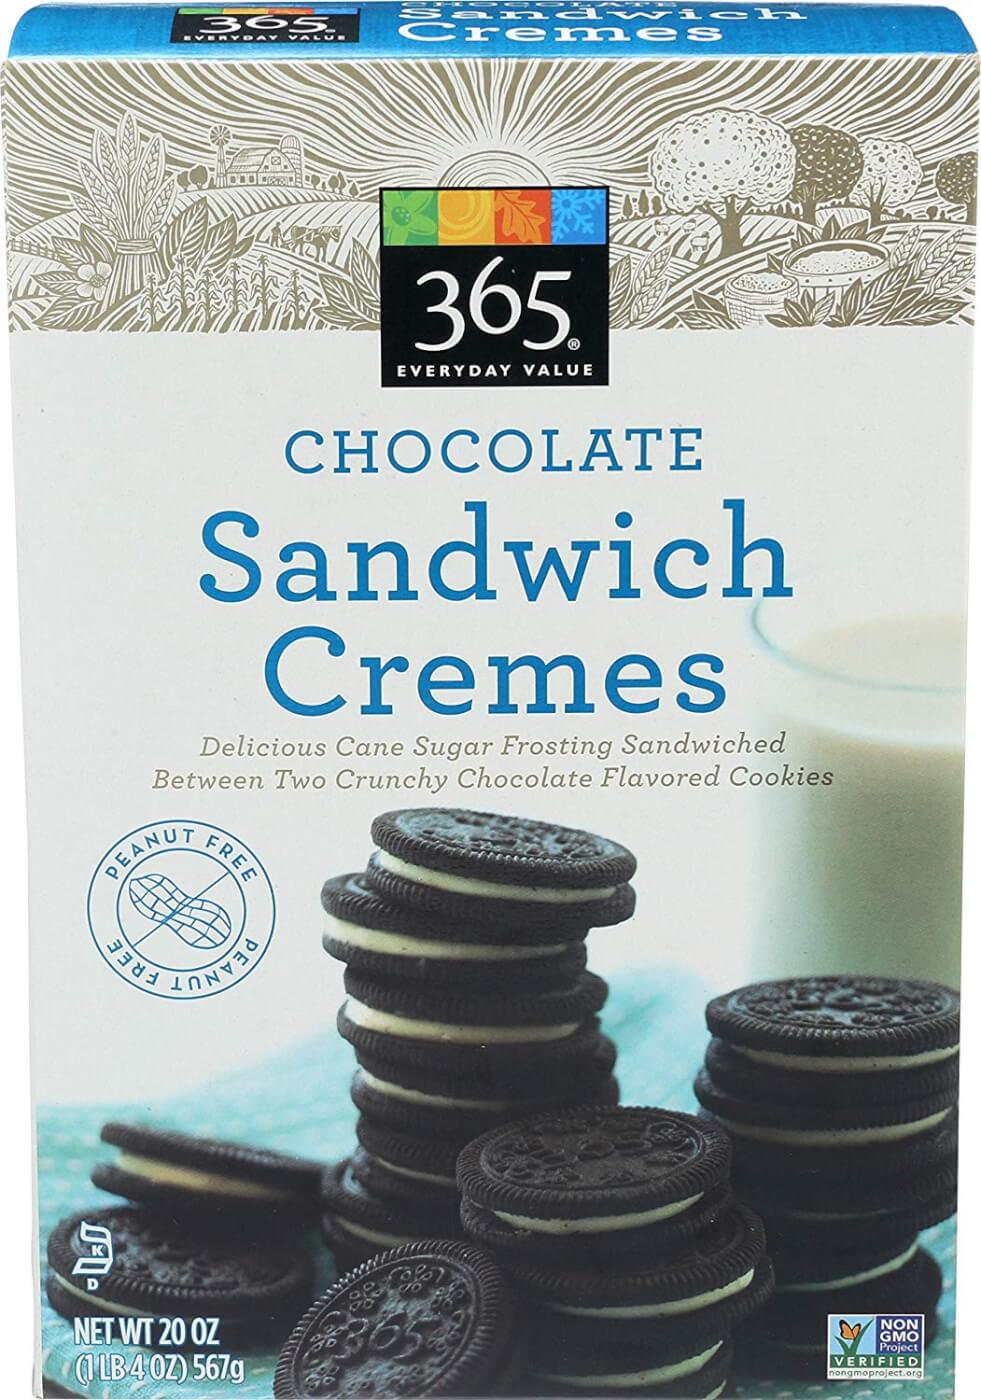 365 Everyday Value Chocolate Sandwich Cremes